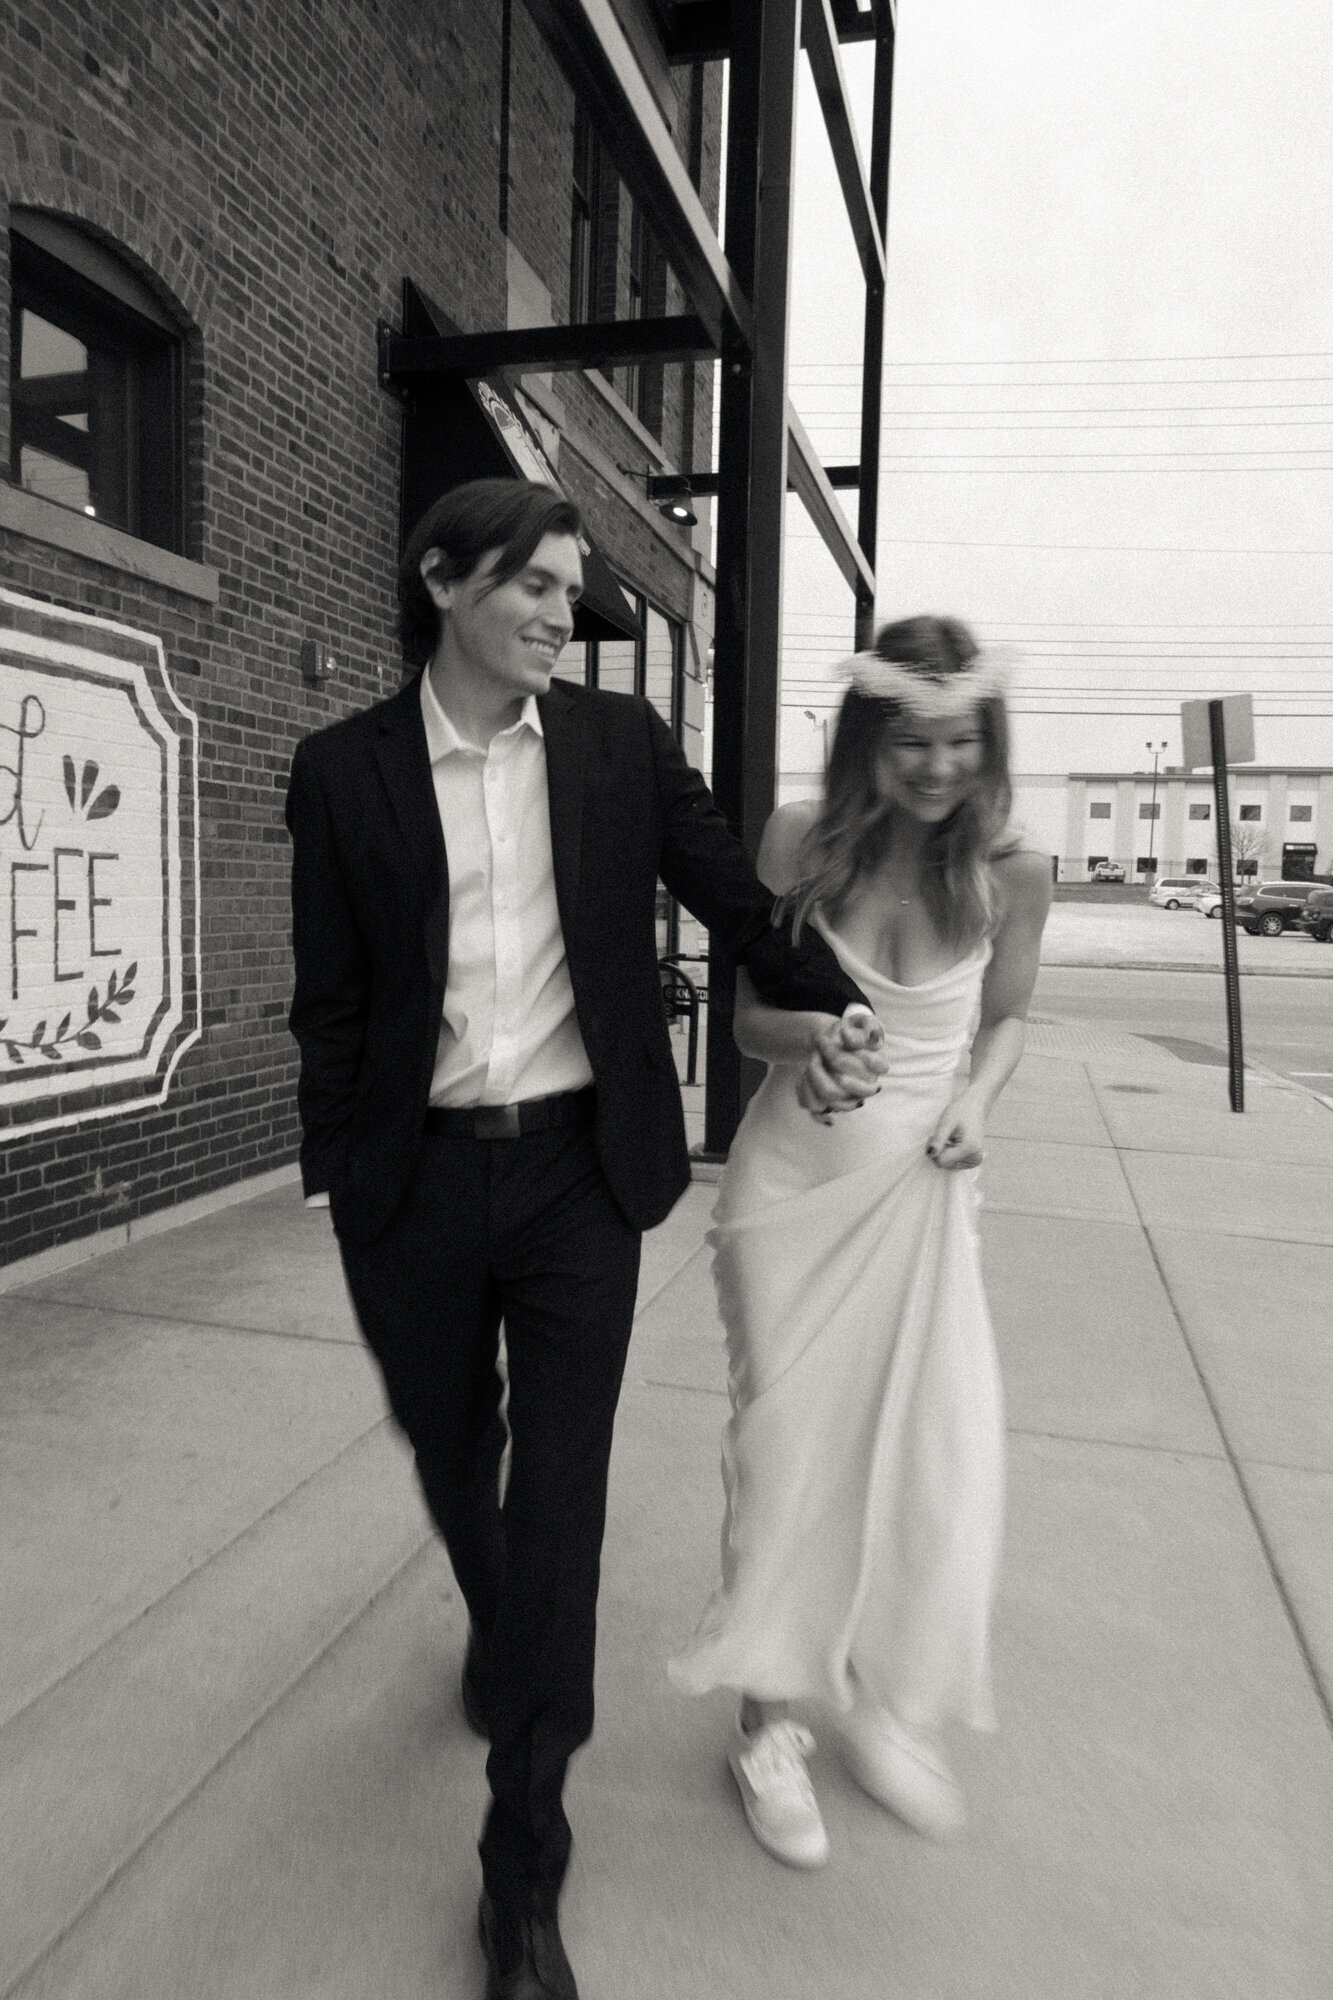 Blurry and Artful Image of Bride and Groom Laughing and Walking In Indianapolis Indiana